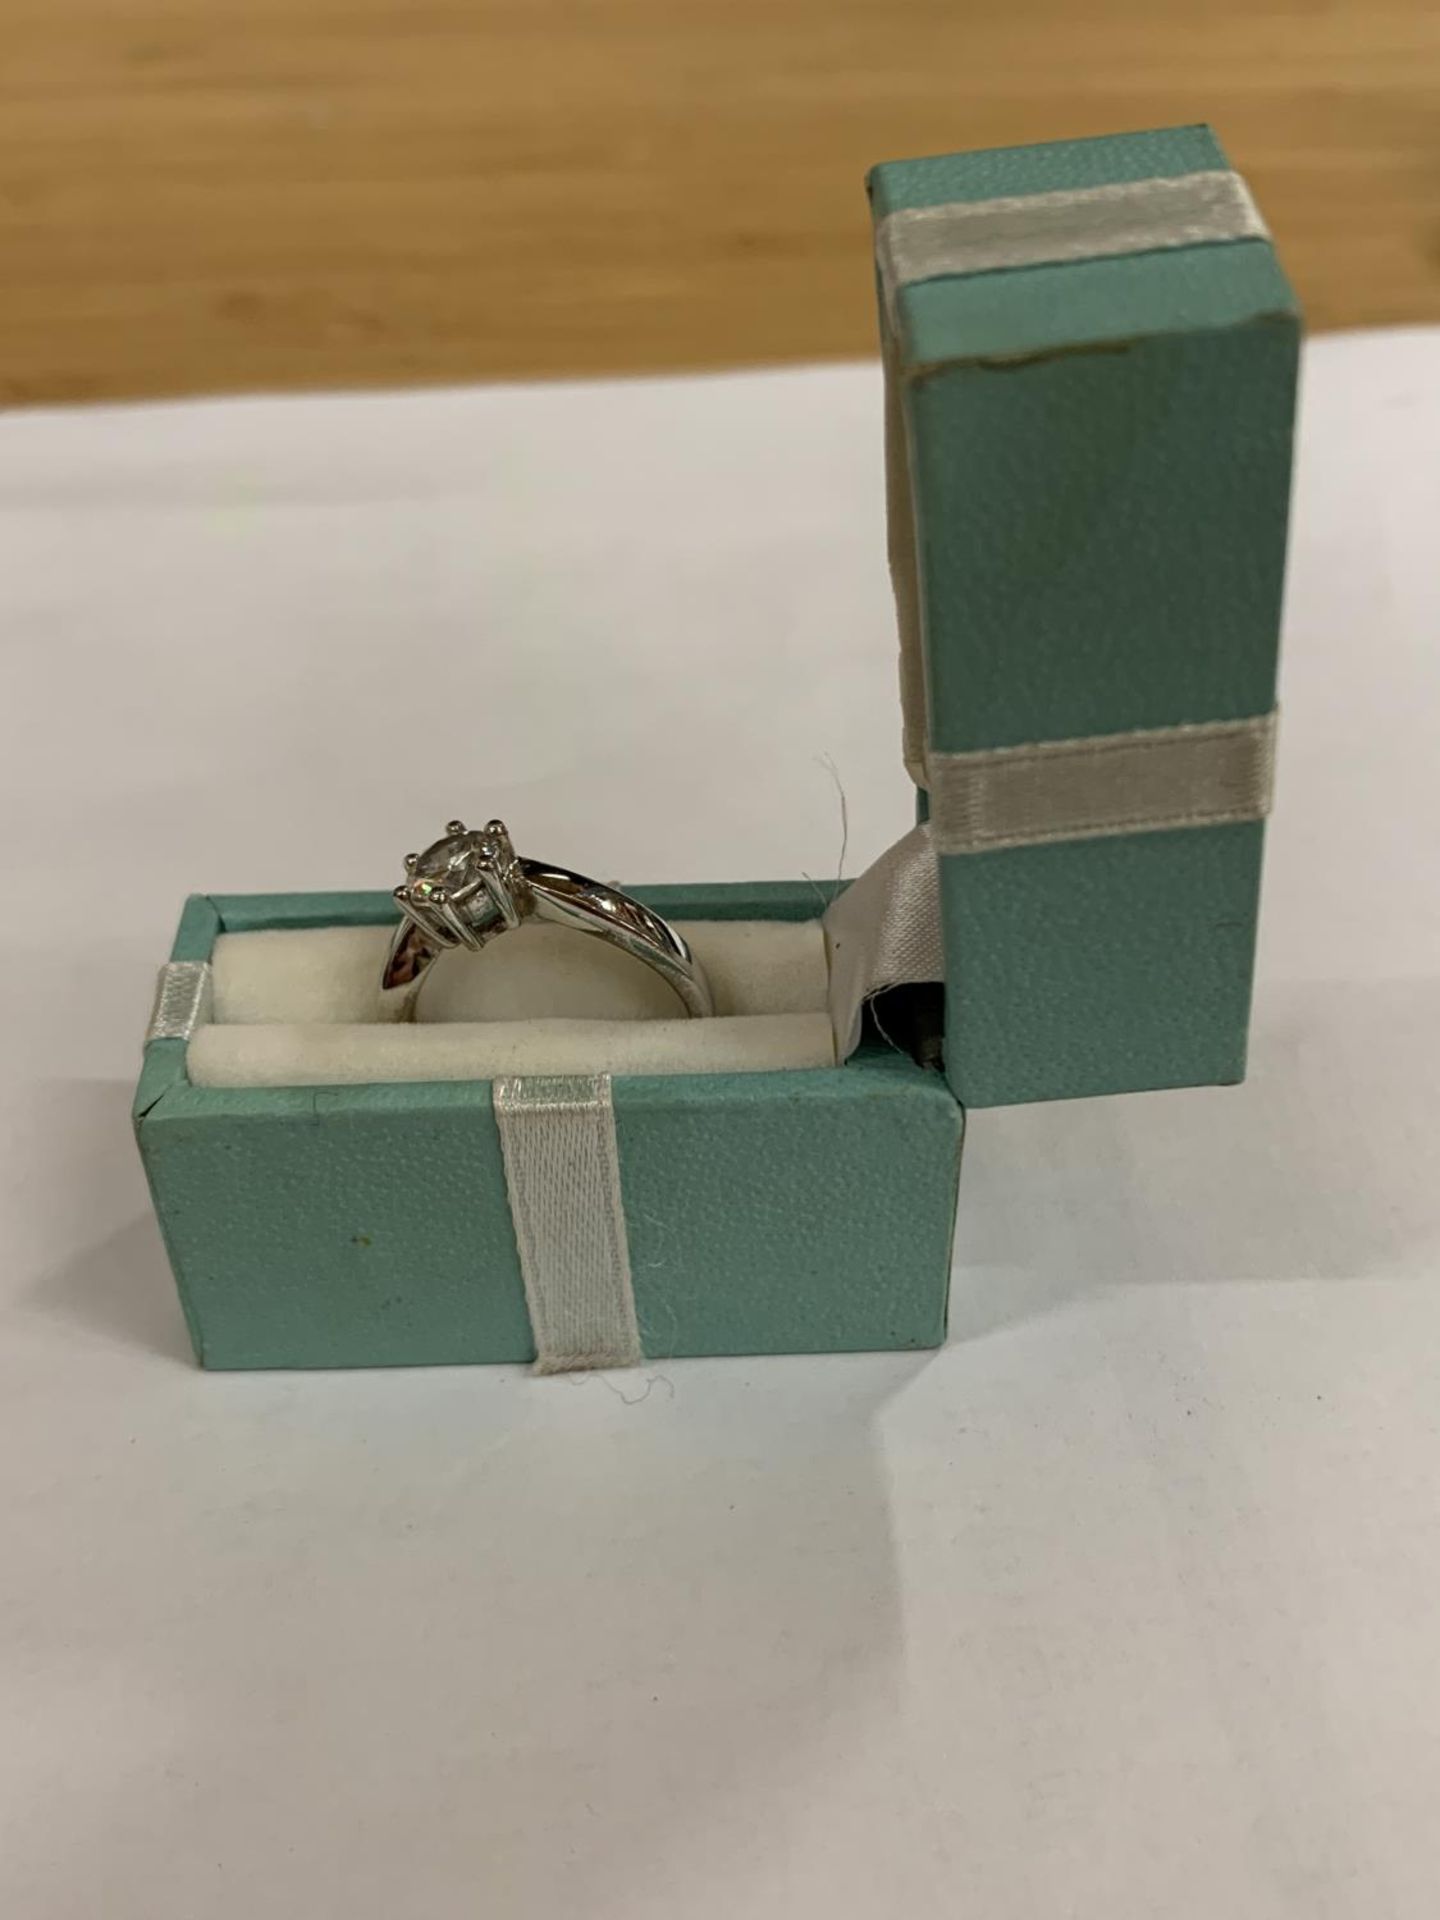 A SILVER SOLITAIRE RING IN A PRESENTATION BOX - Image 2 of 4